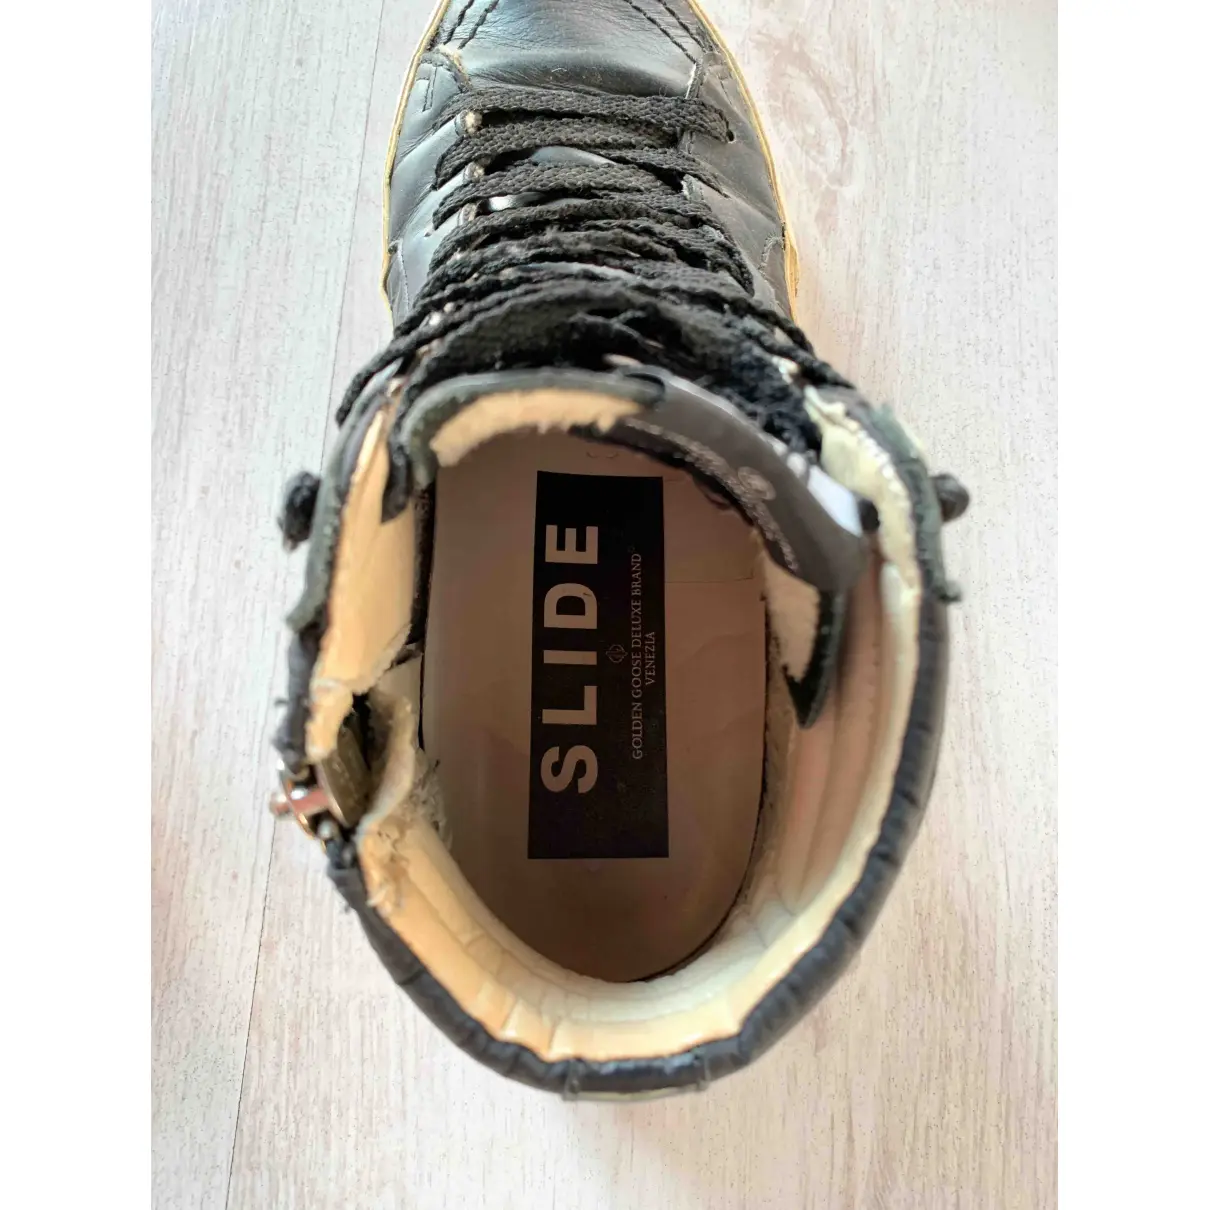 Slide leather trainers Golden Goose